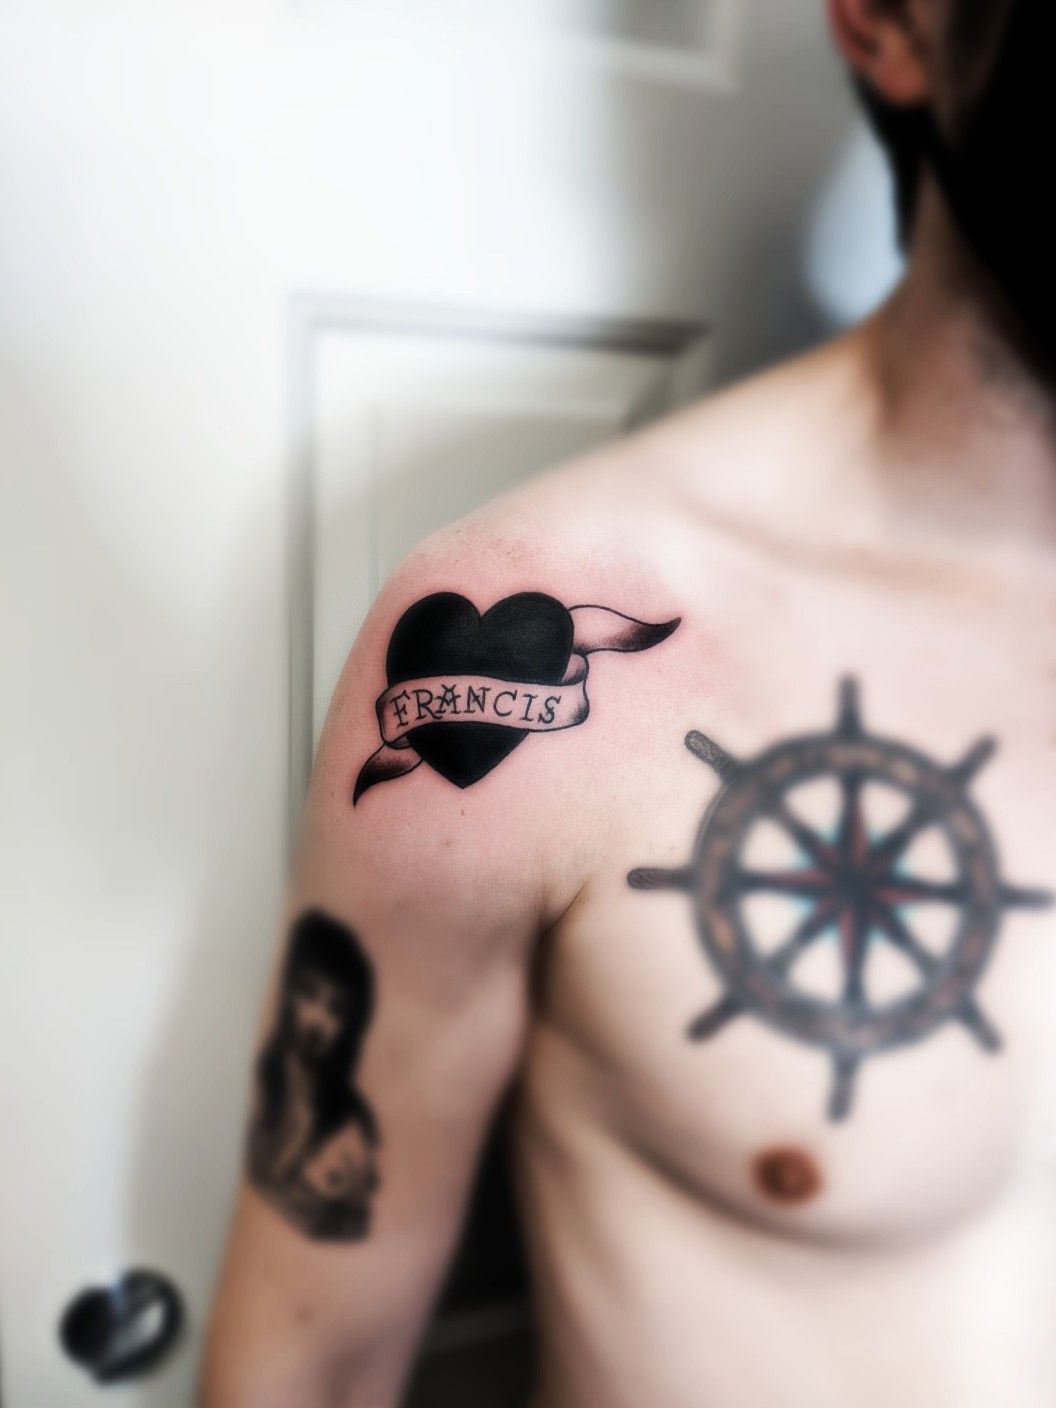 heart tattoo with name inside